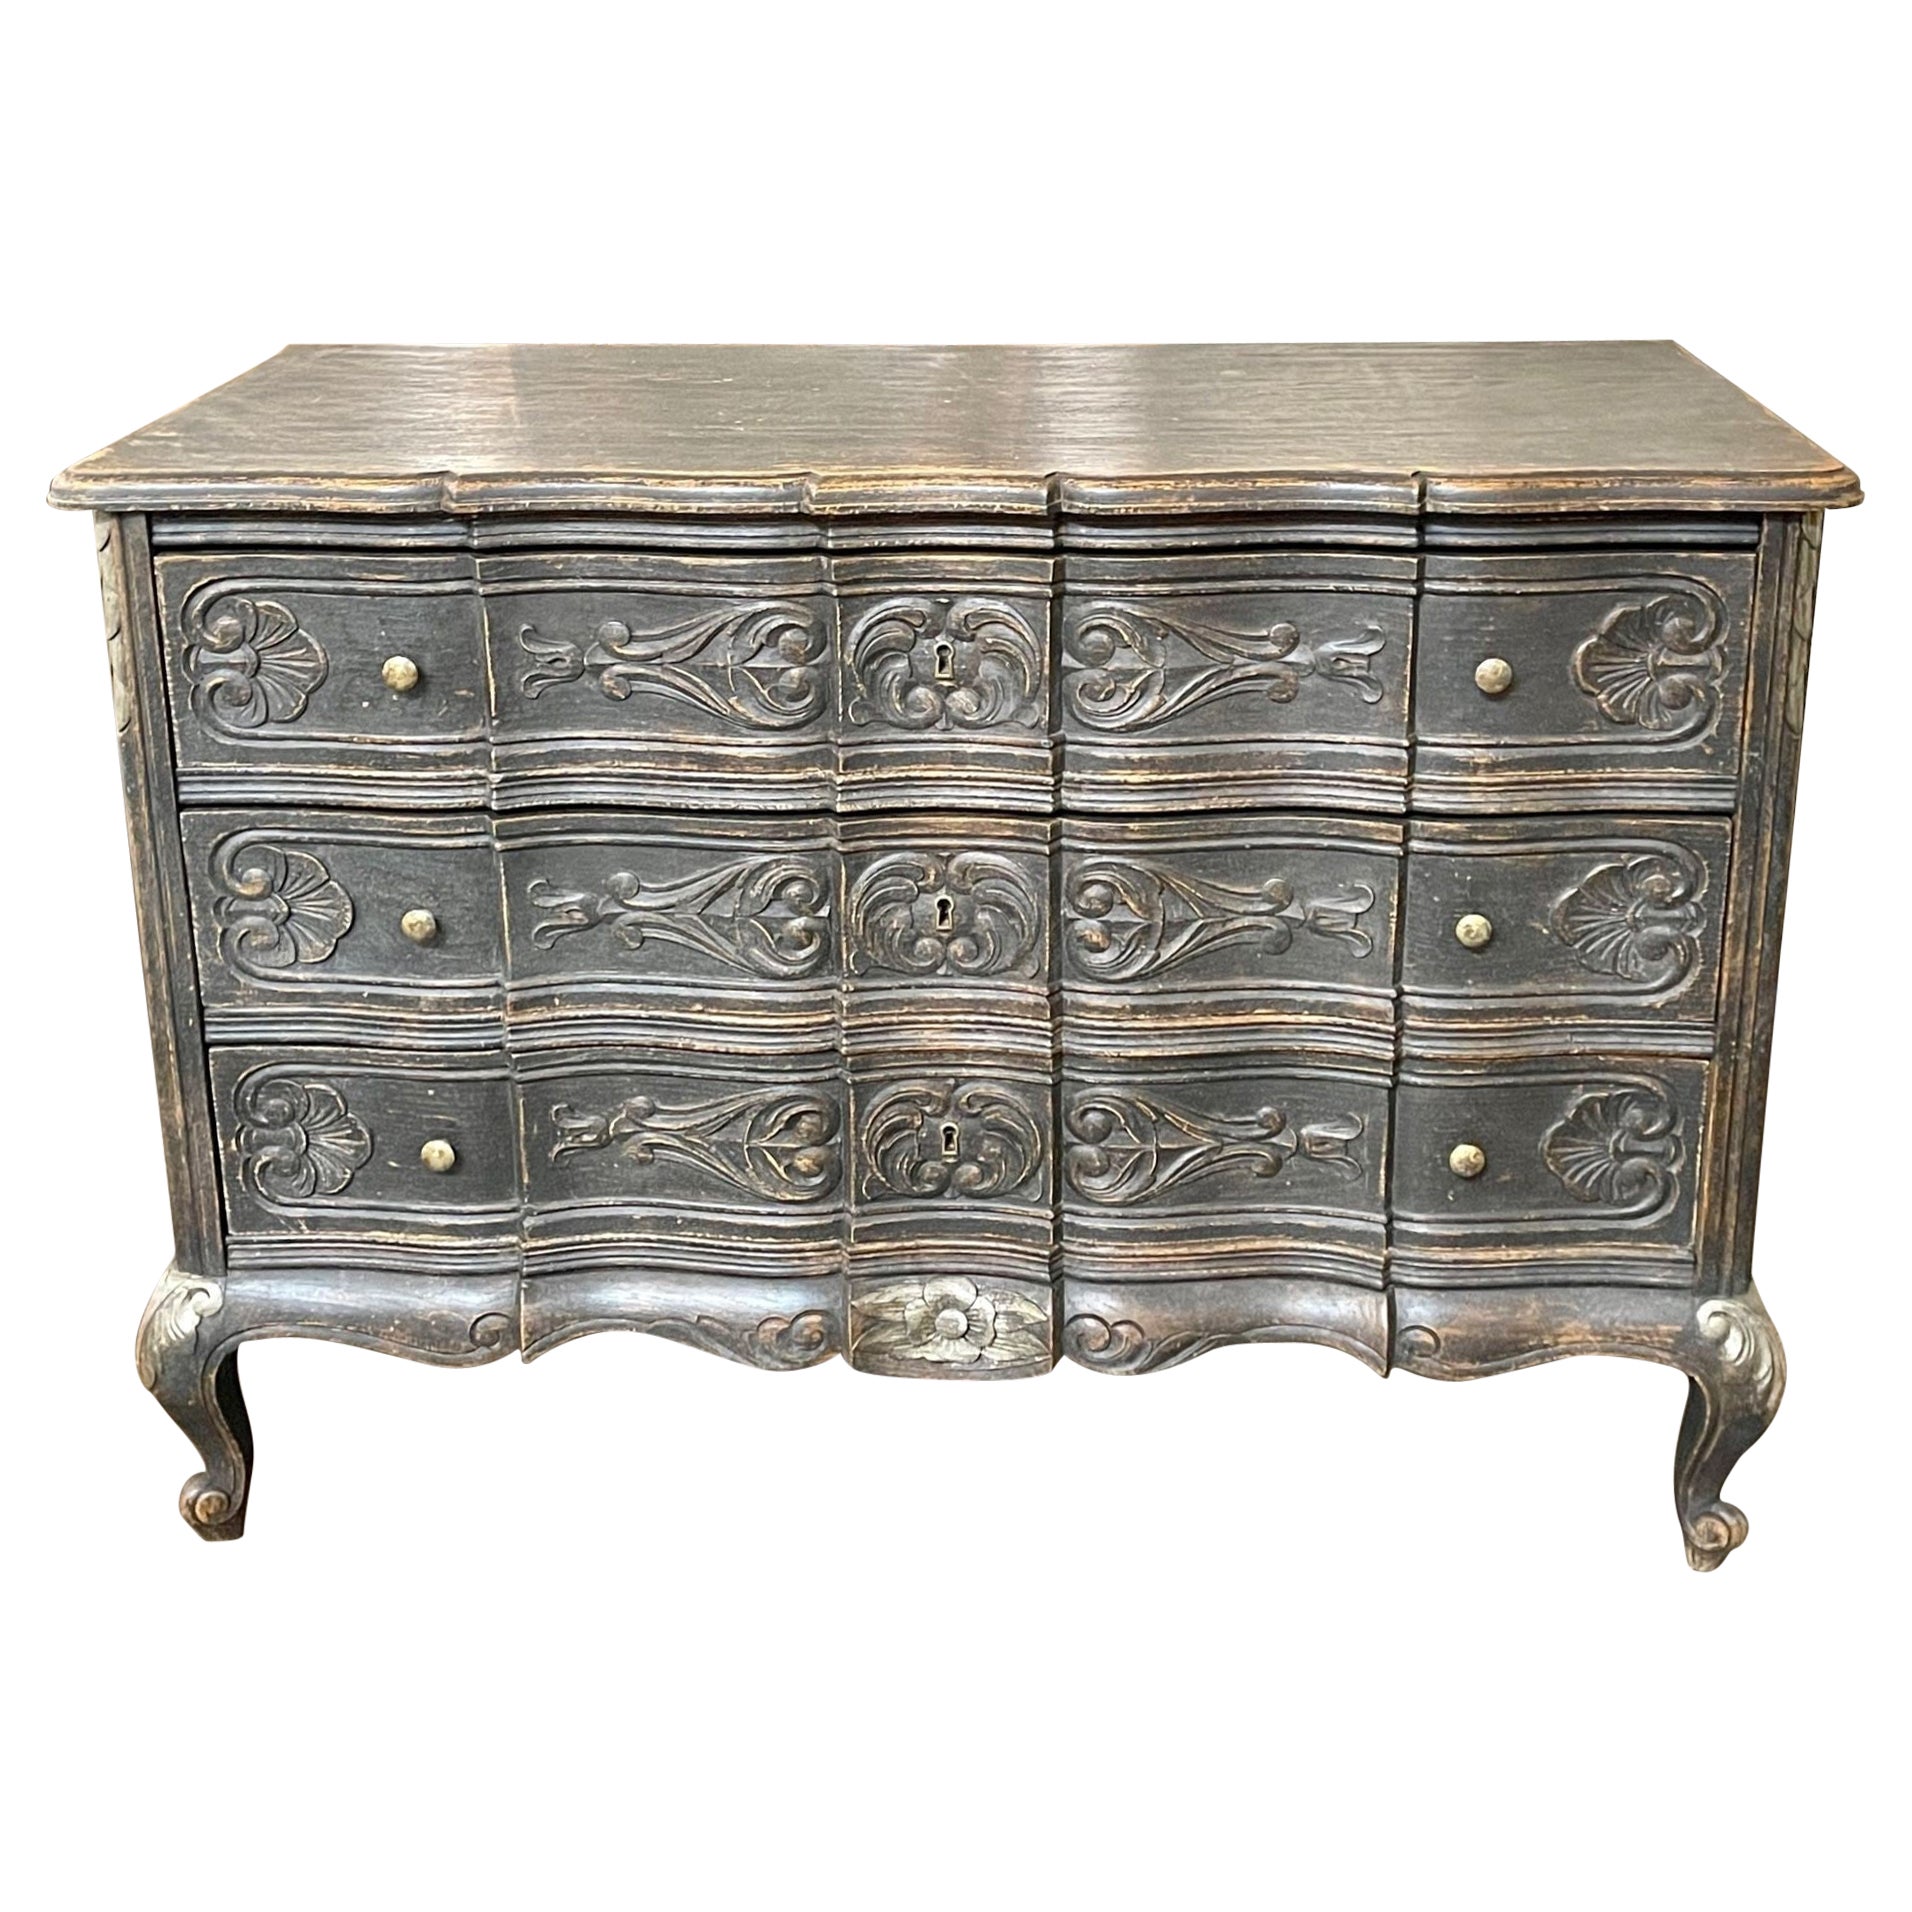 19th Century French Carved and Painted Bedside Chest For Sale